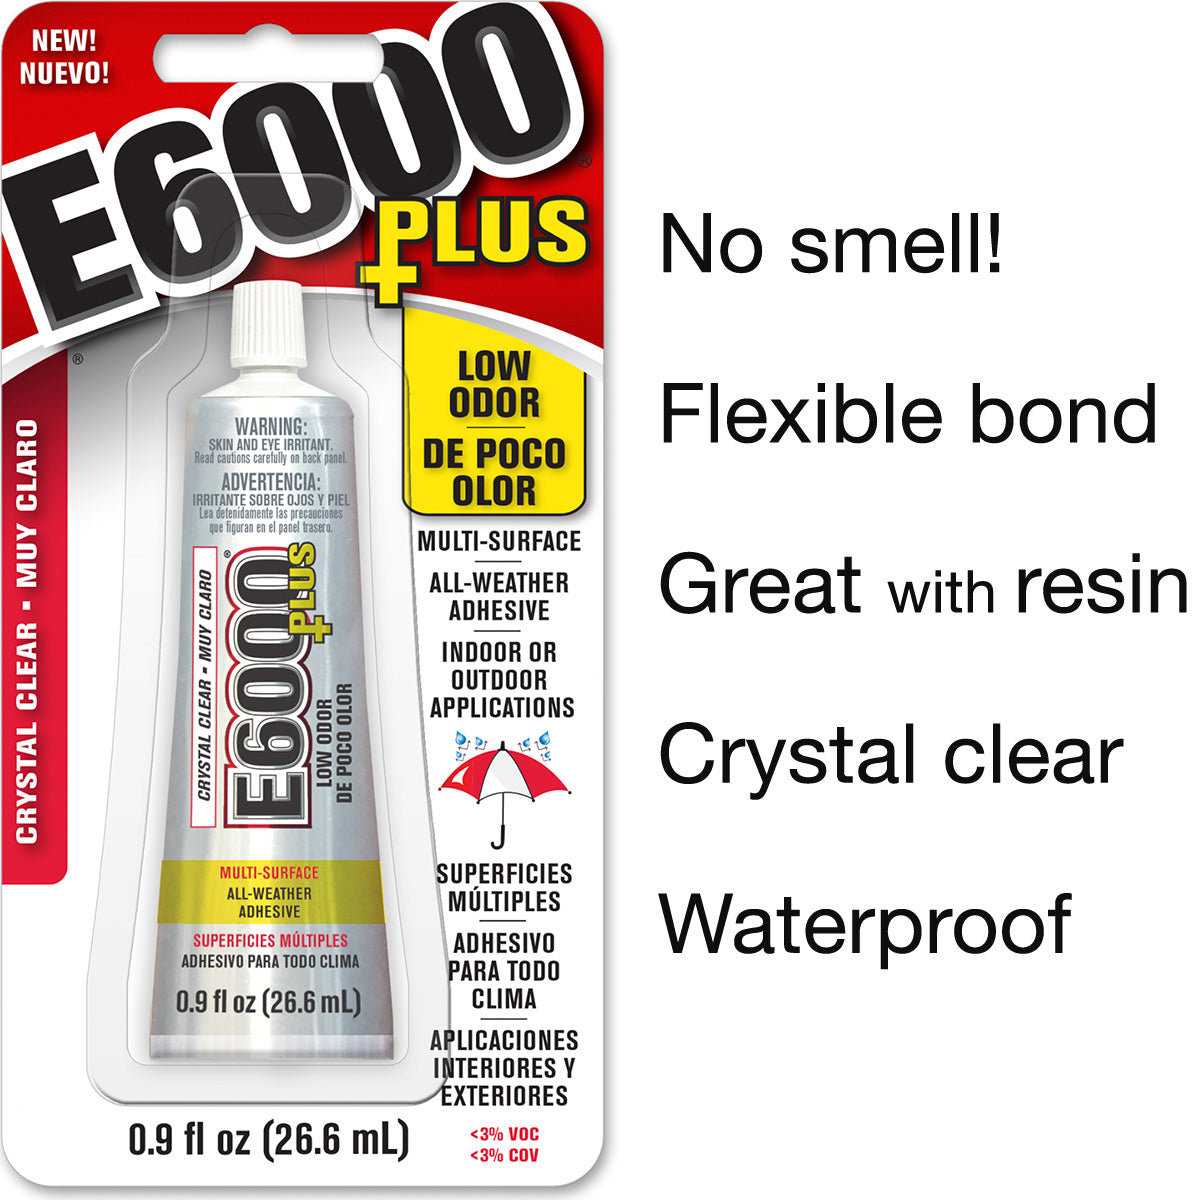 E6000+ Plus - flexible adhesive for Resin Jewelry Making